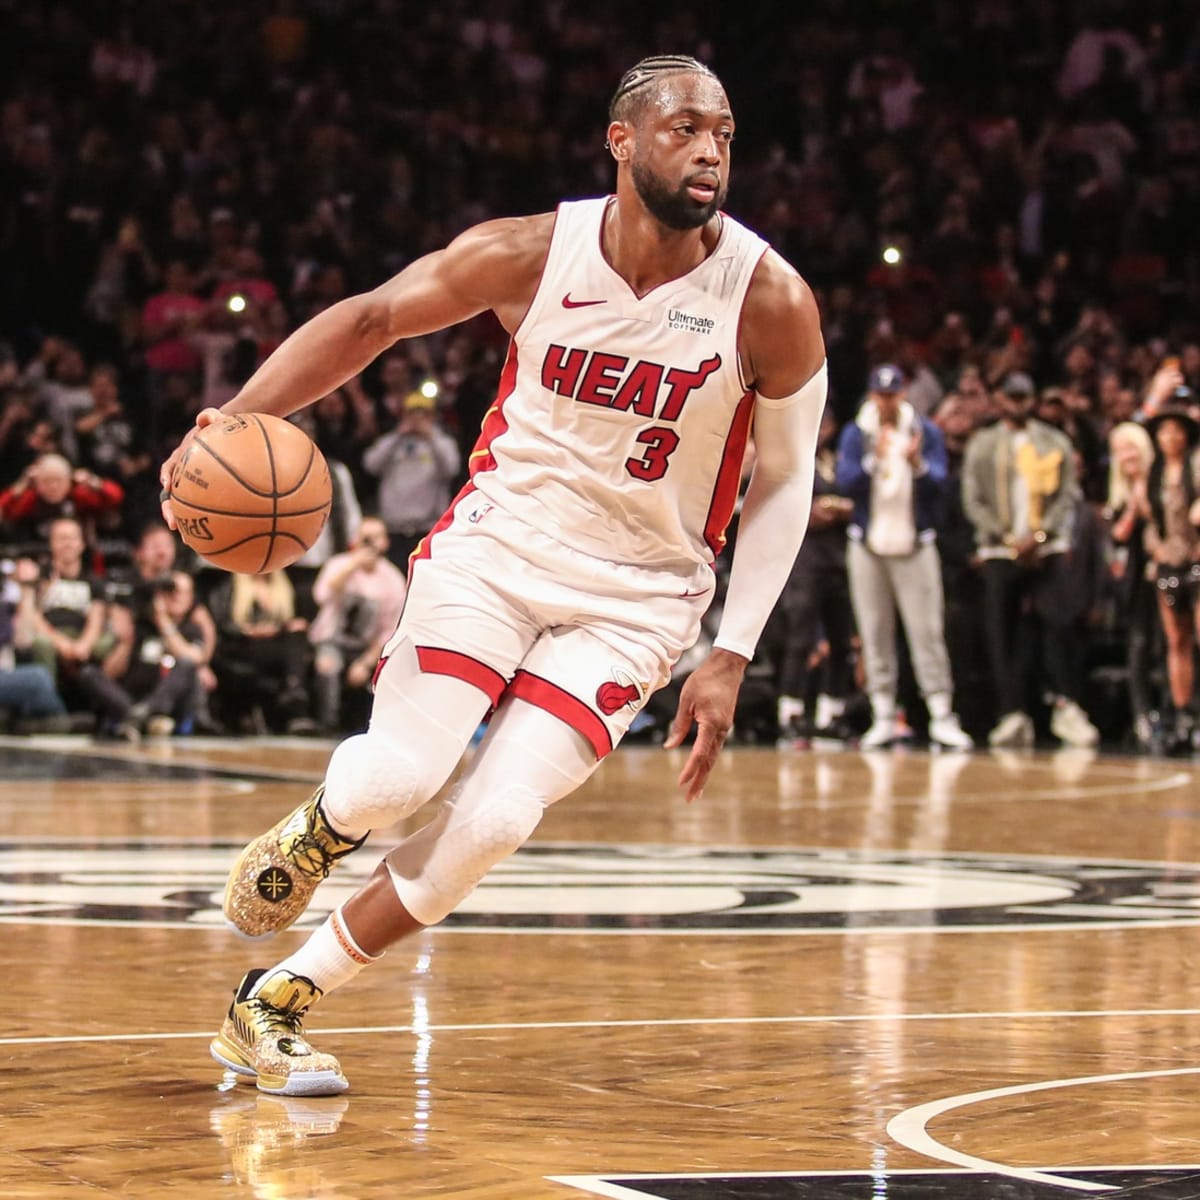 The Miami Heat's Dwyane Wade, left, holds a jersey with the number